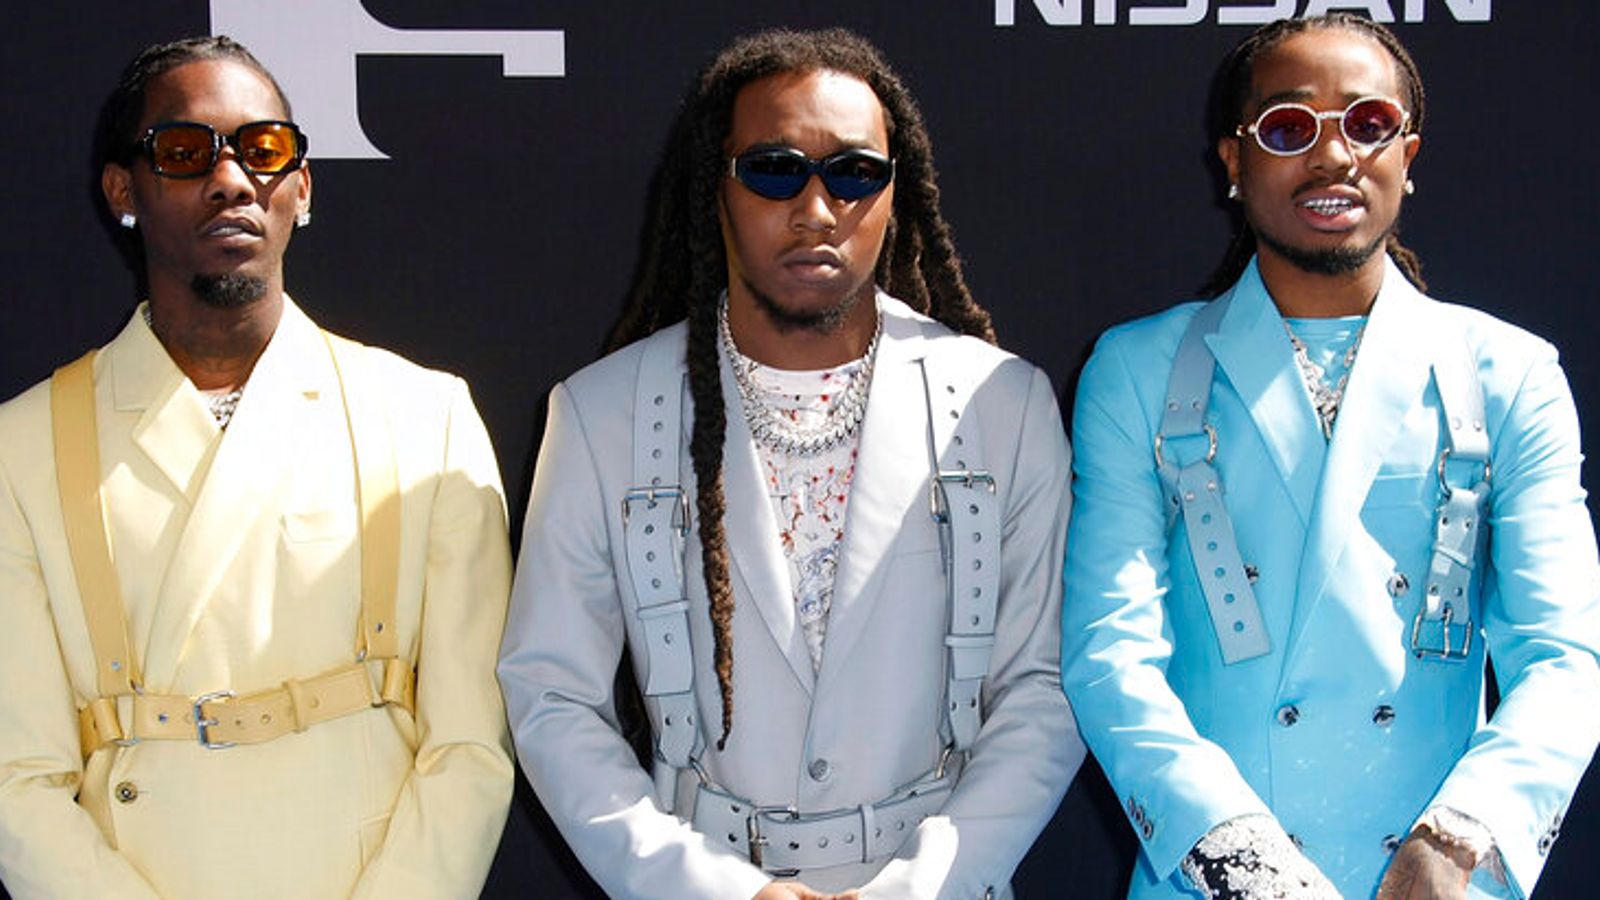 Migos’ Offset And Quavo Pay Tribute To Takeoff On Anniversary Of Fatal Shooting